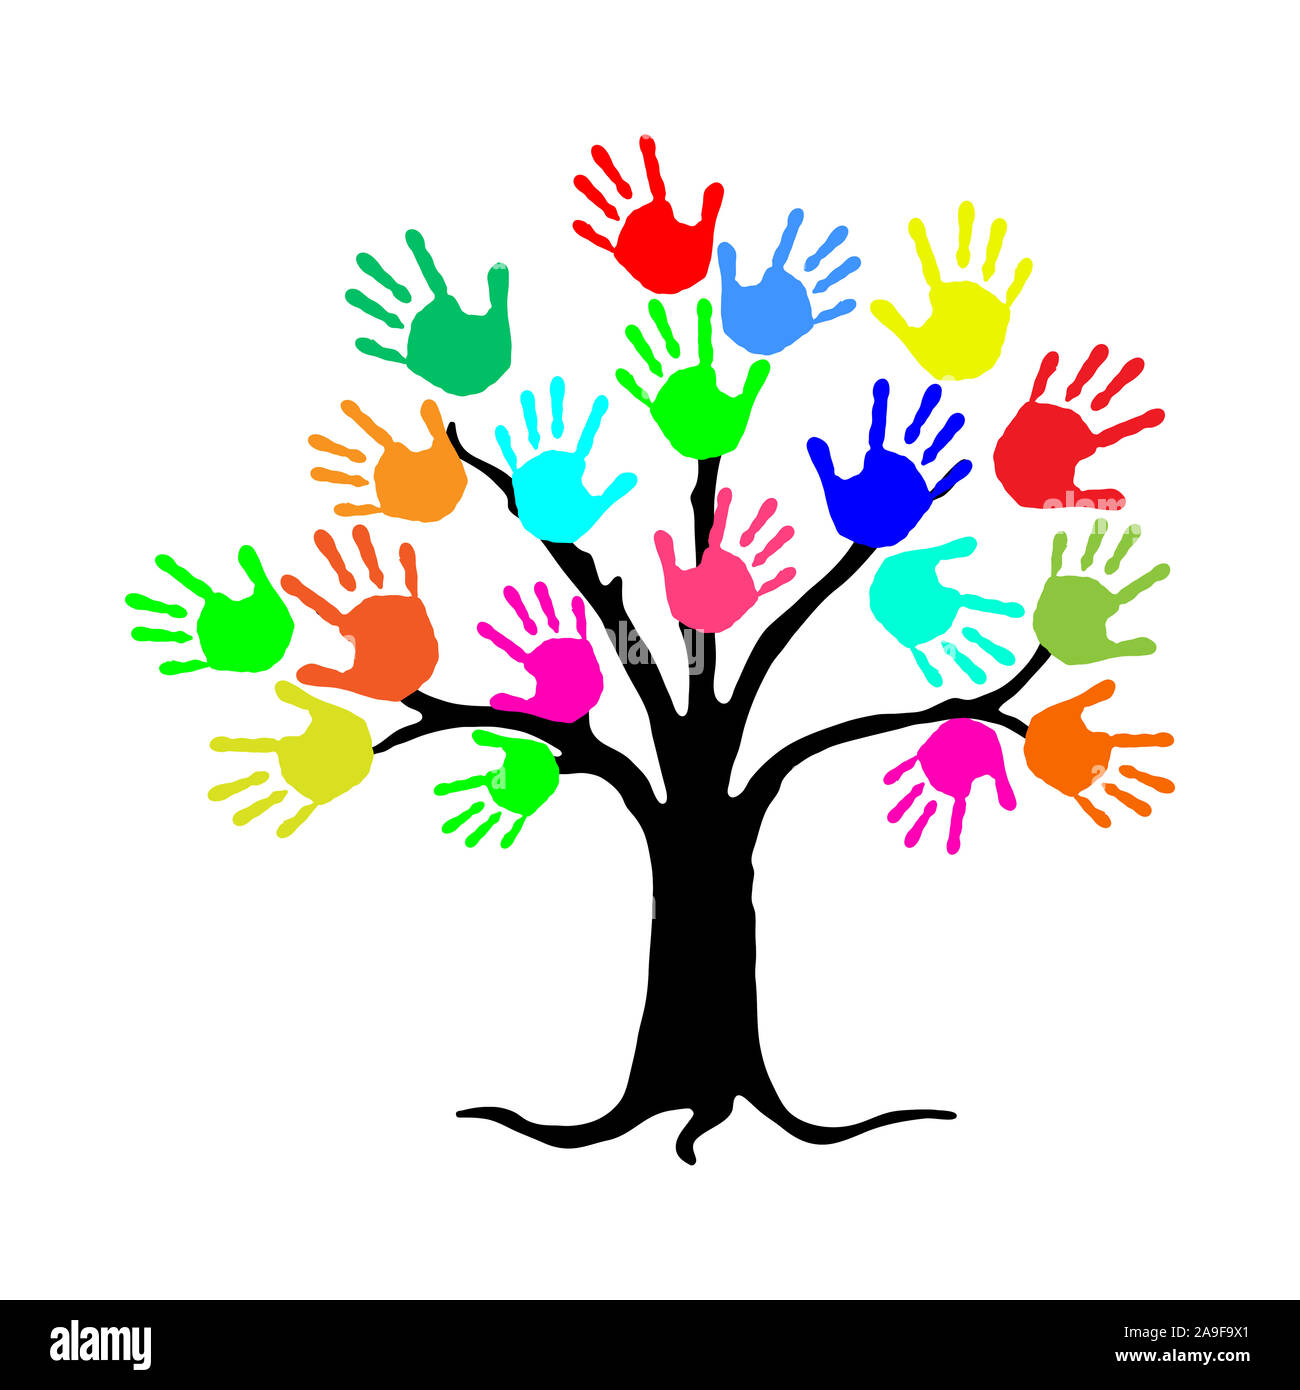 Many colorful hands on a tree Stock Photo